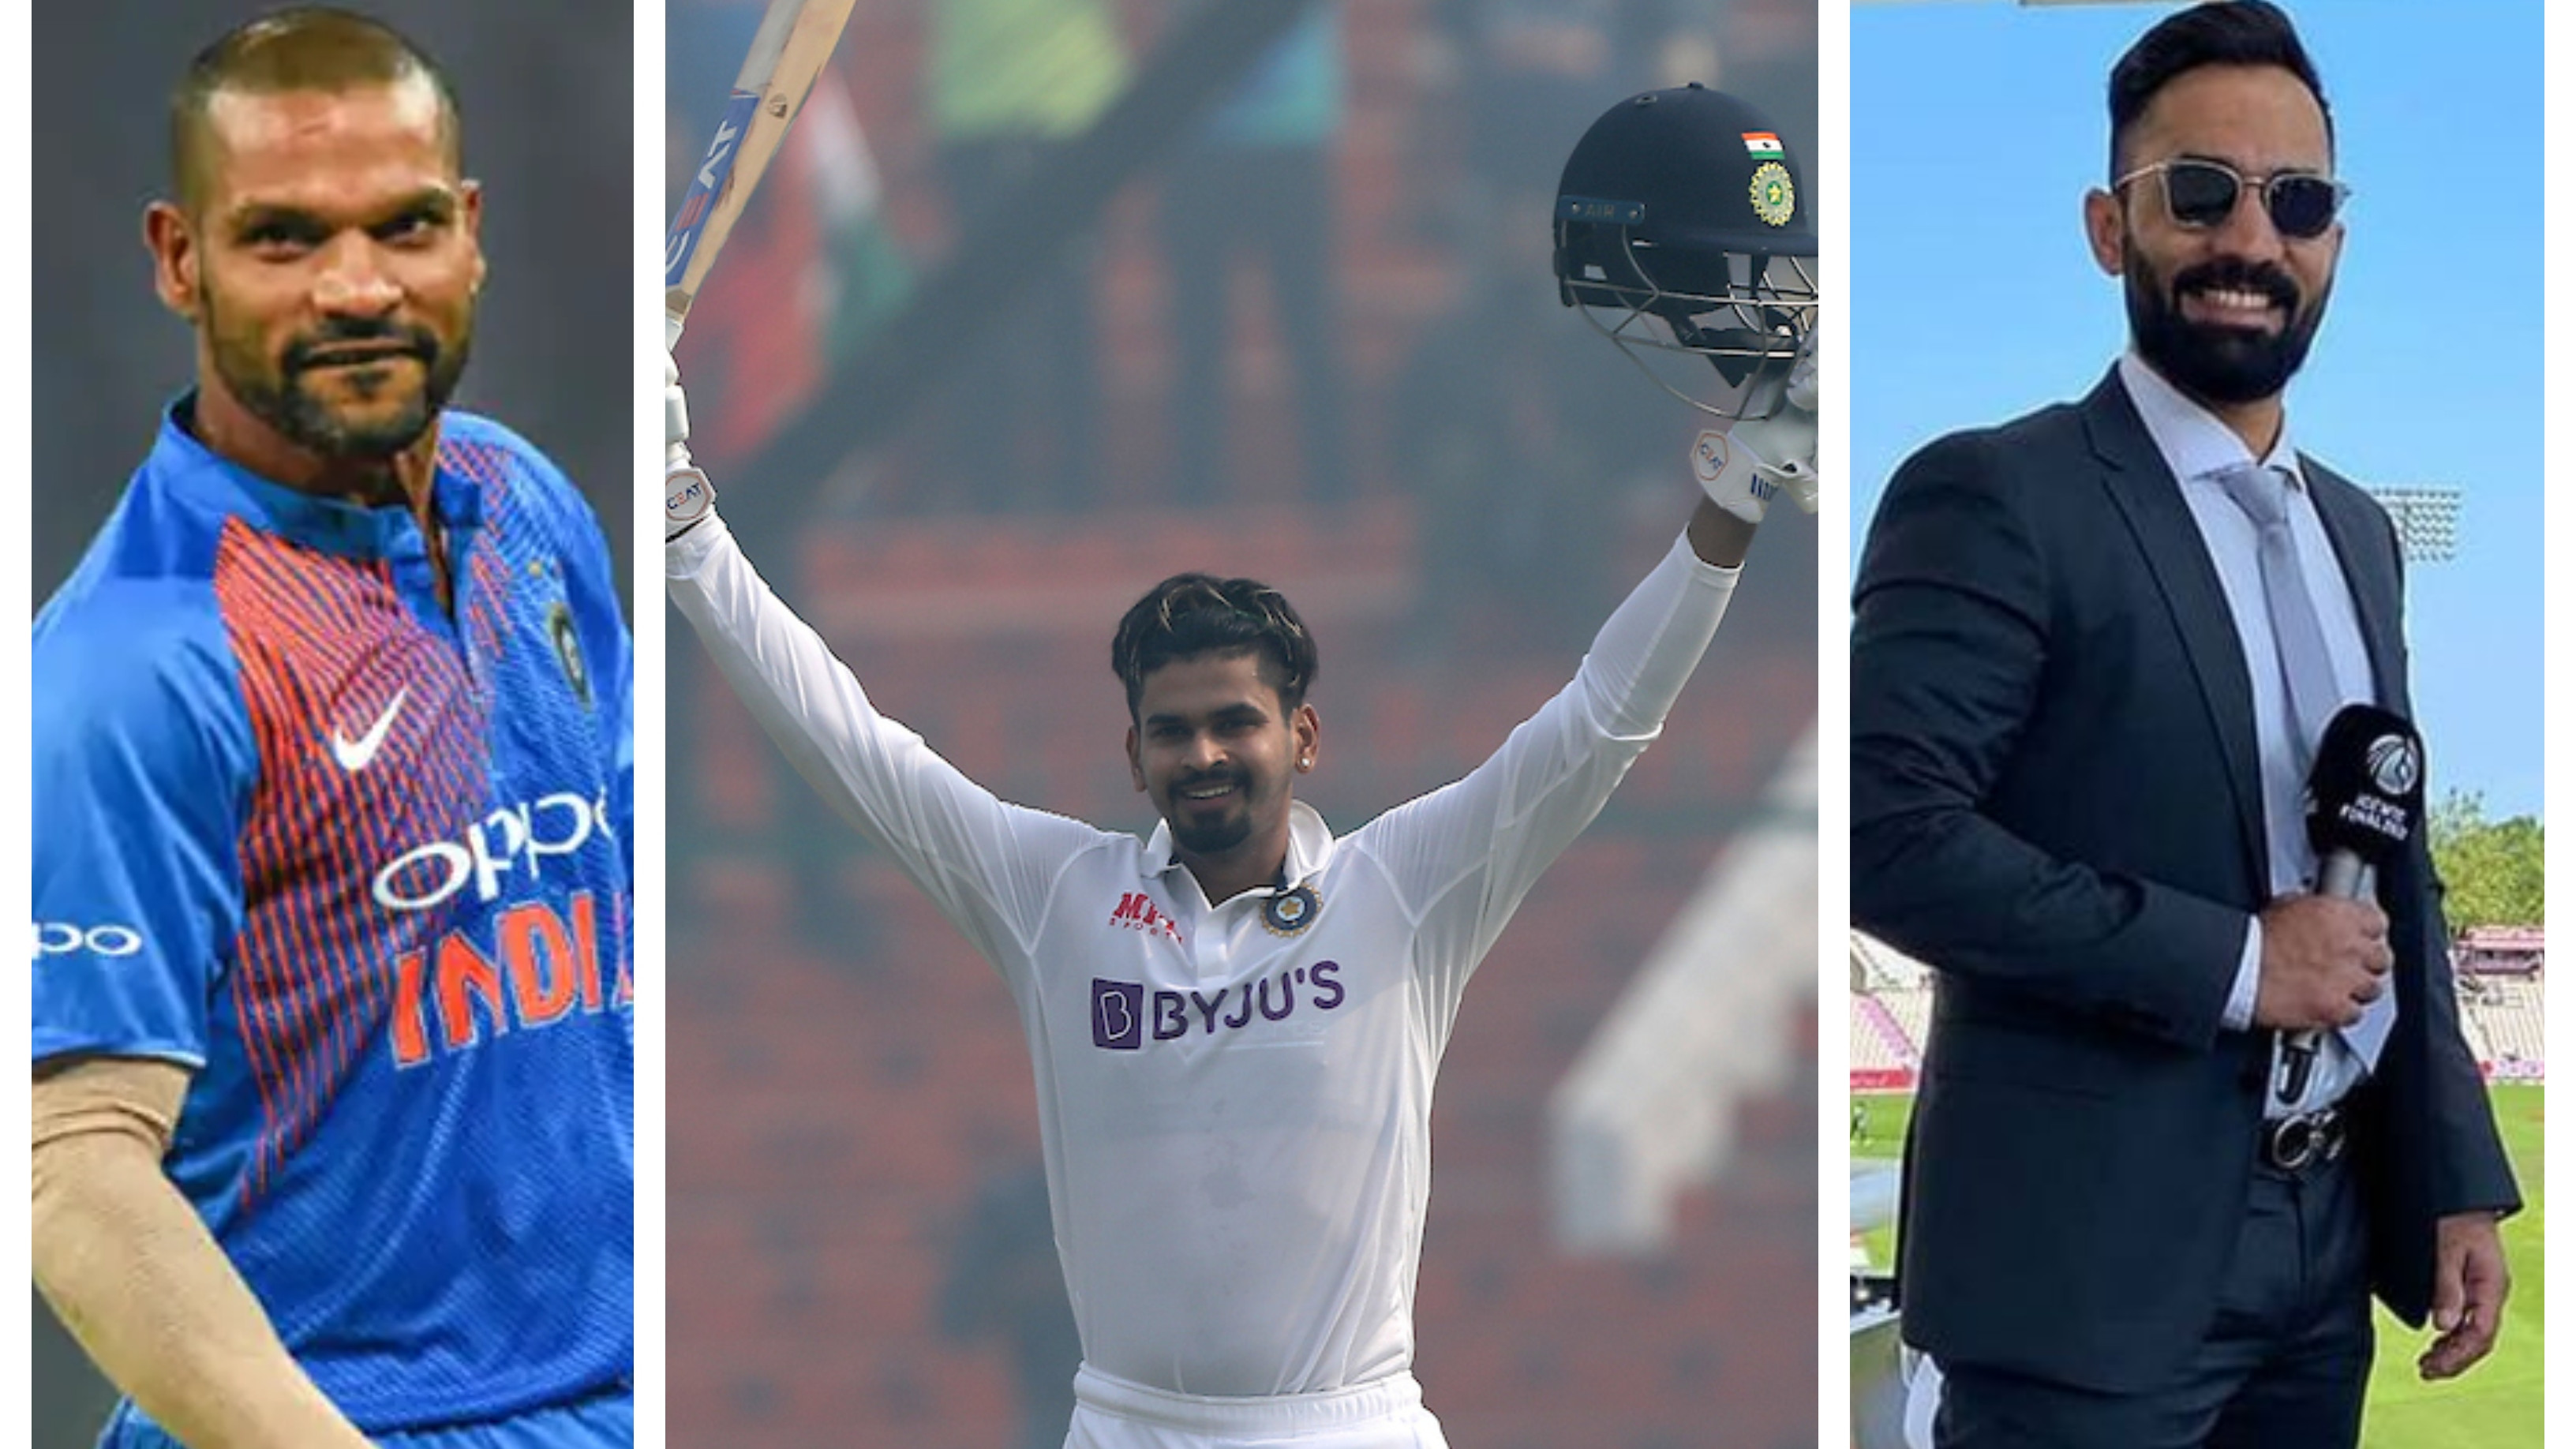 IND v NZ 2021: Cricket fraternity lauds Shreyas Iyer as he slams century on Test debut in Kanpur